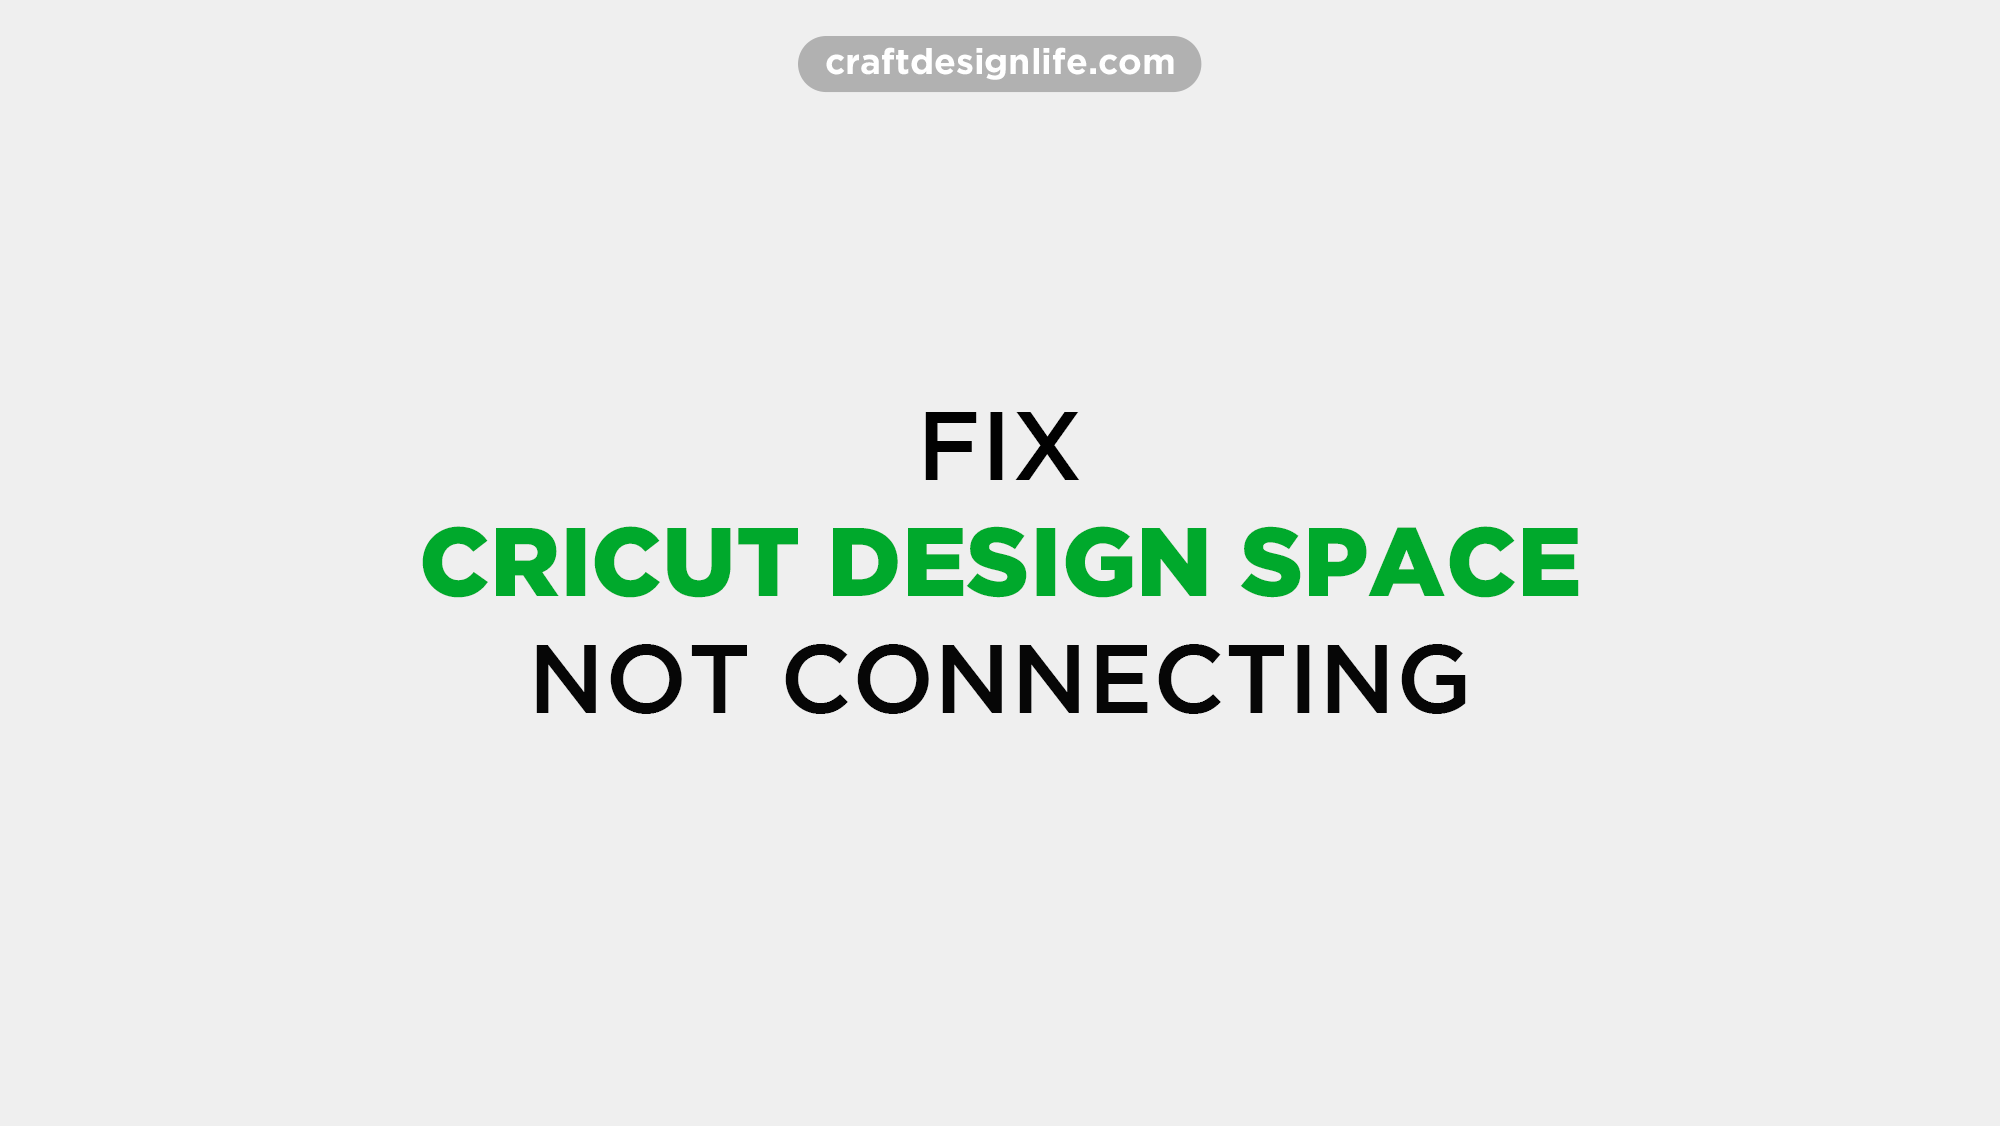 Cricut-design-space-is-not-connecting